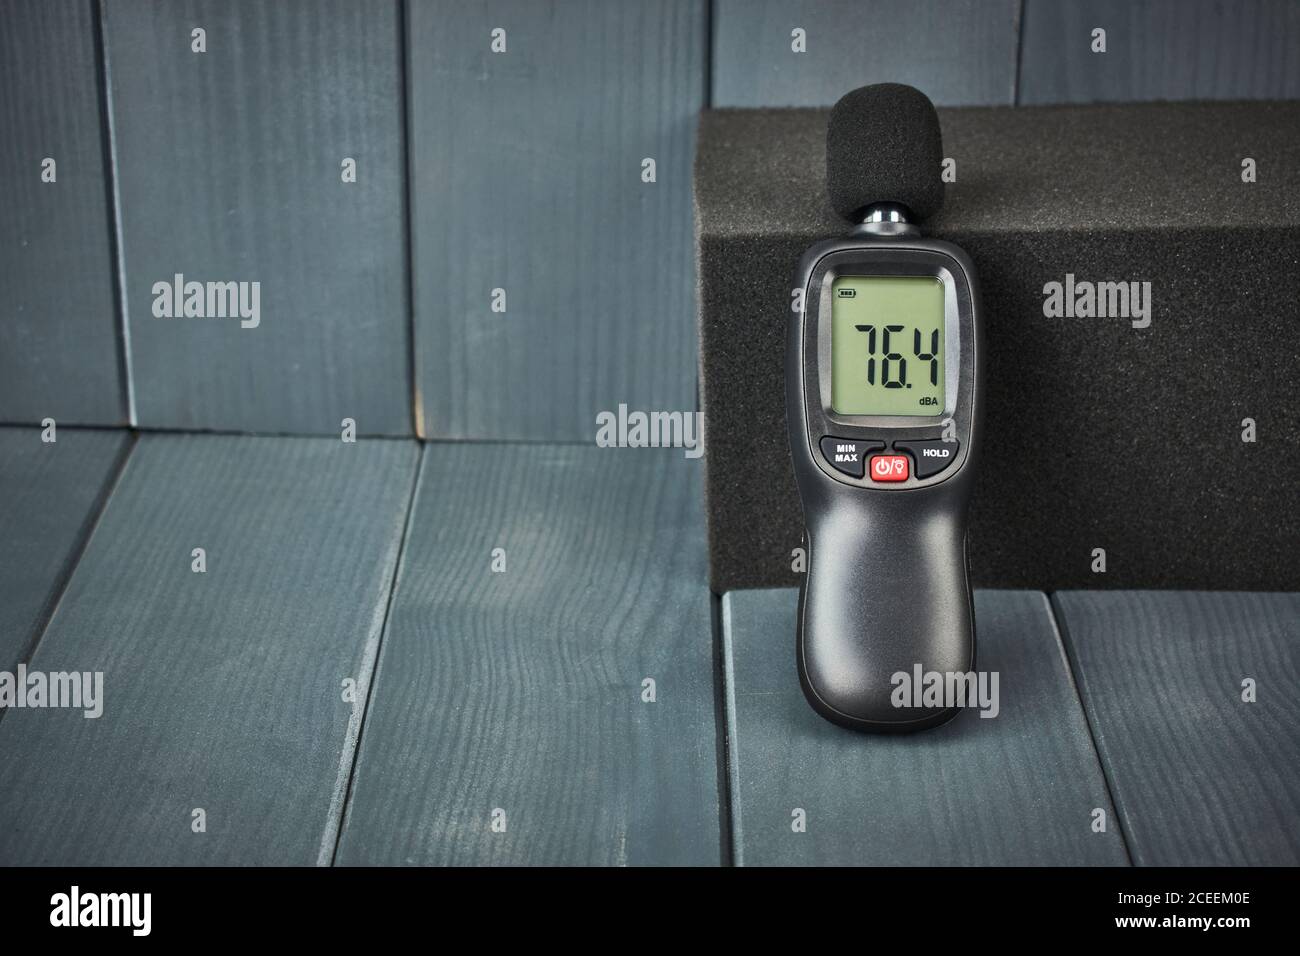 Digital sound level meter with display and control buttons on acoustic foam Stock Photo